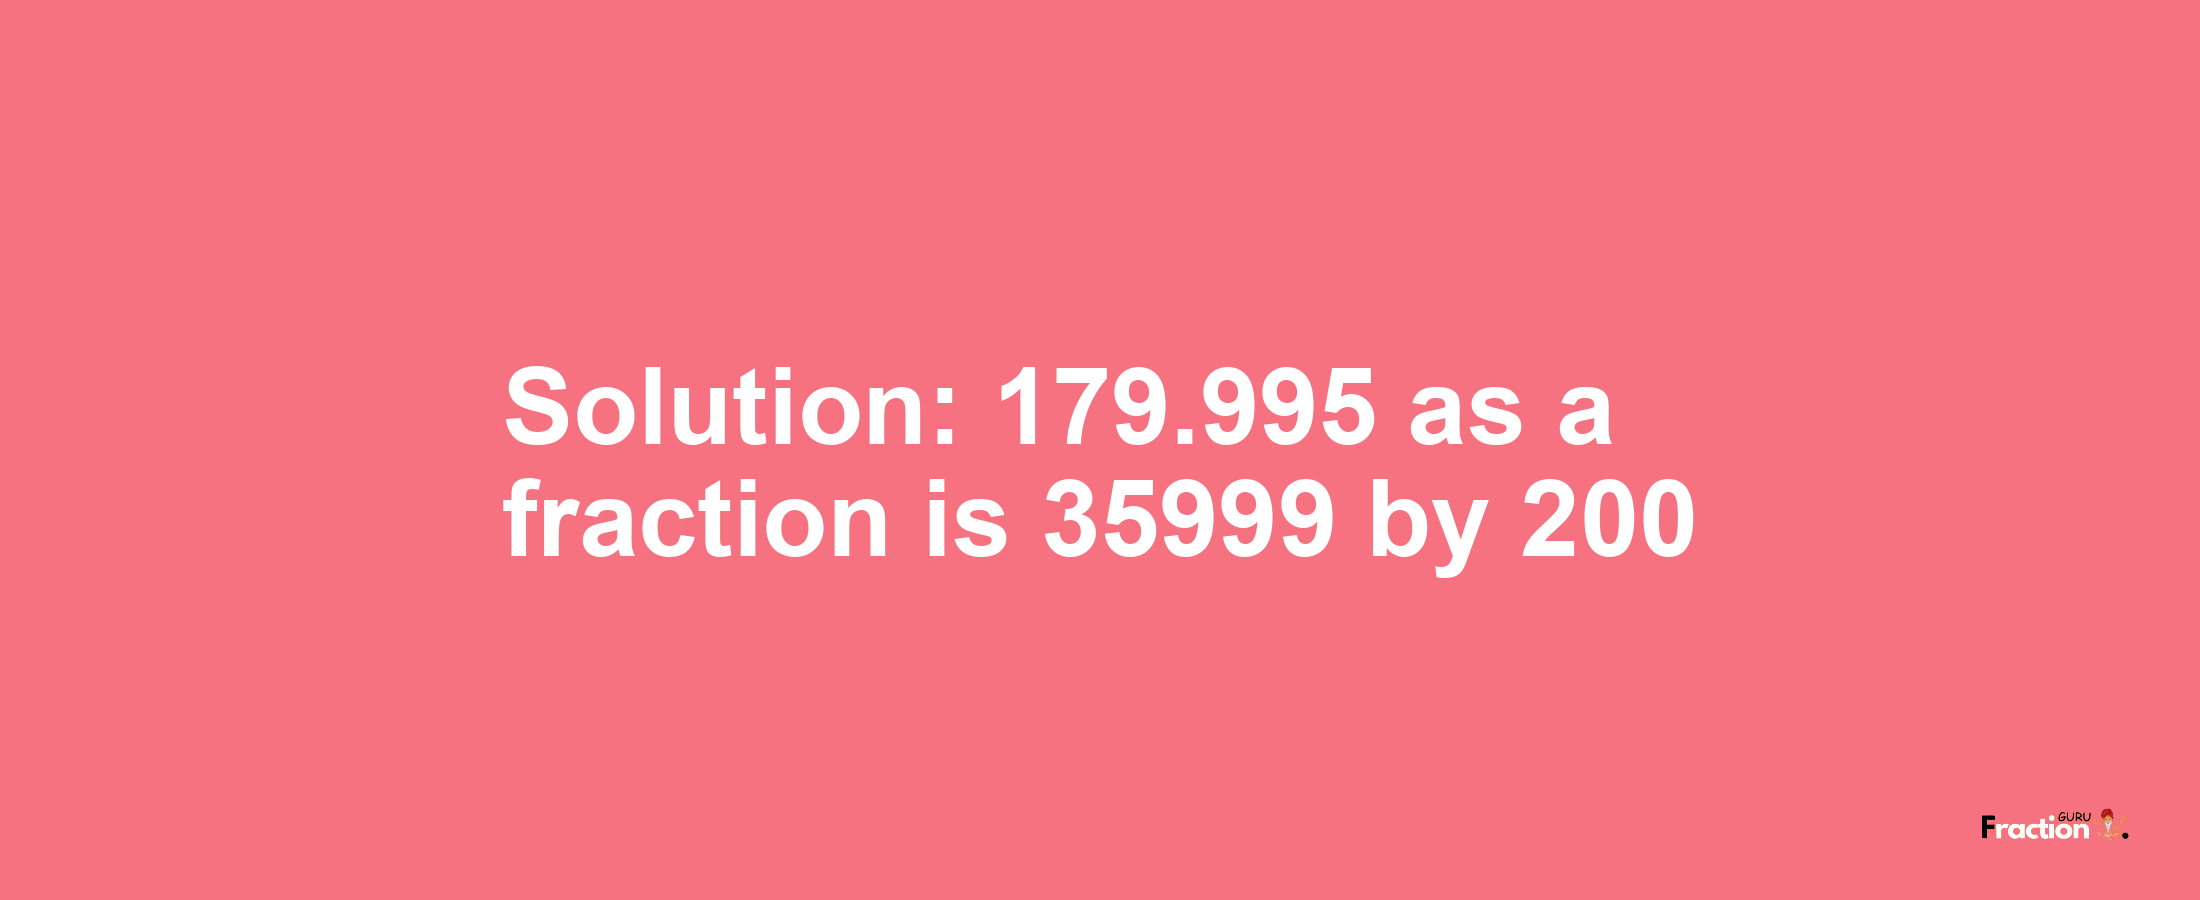 Solution:179.995 as a fraction is 35999/200